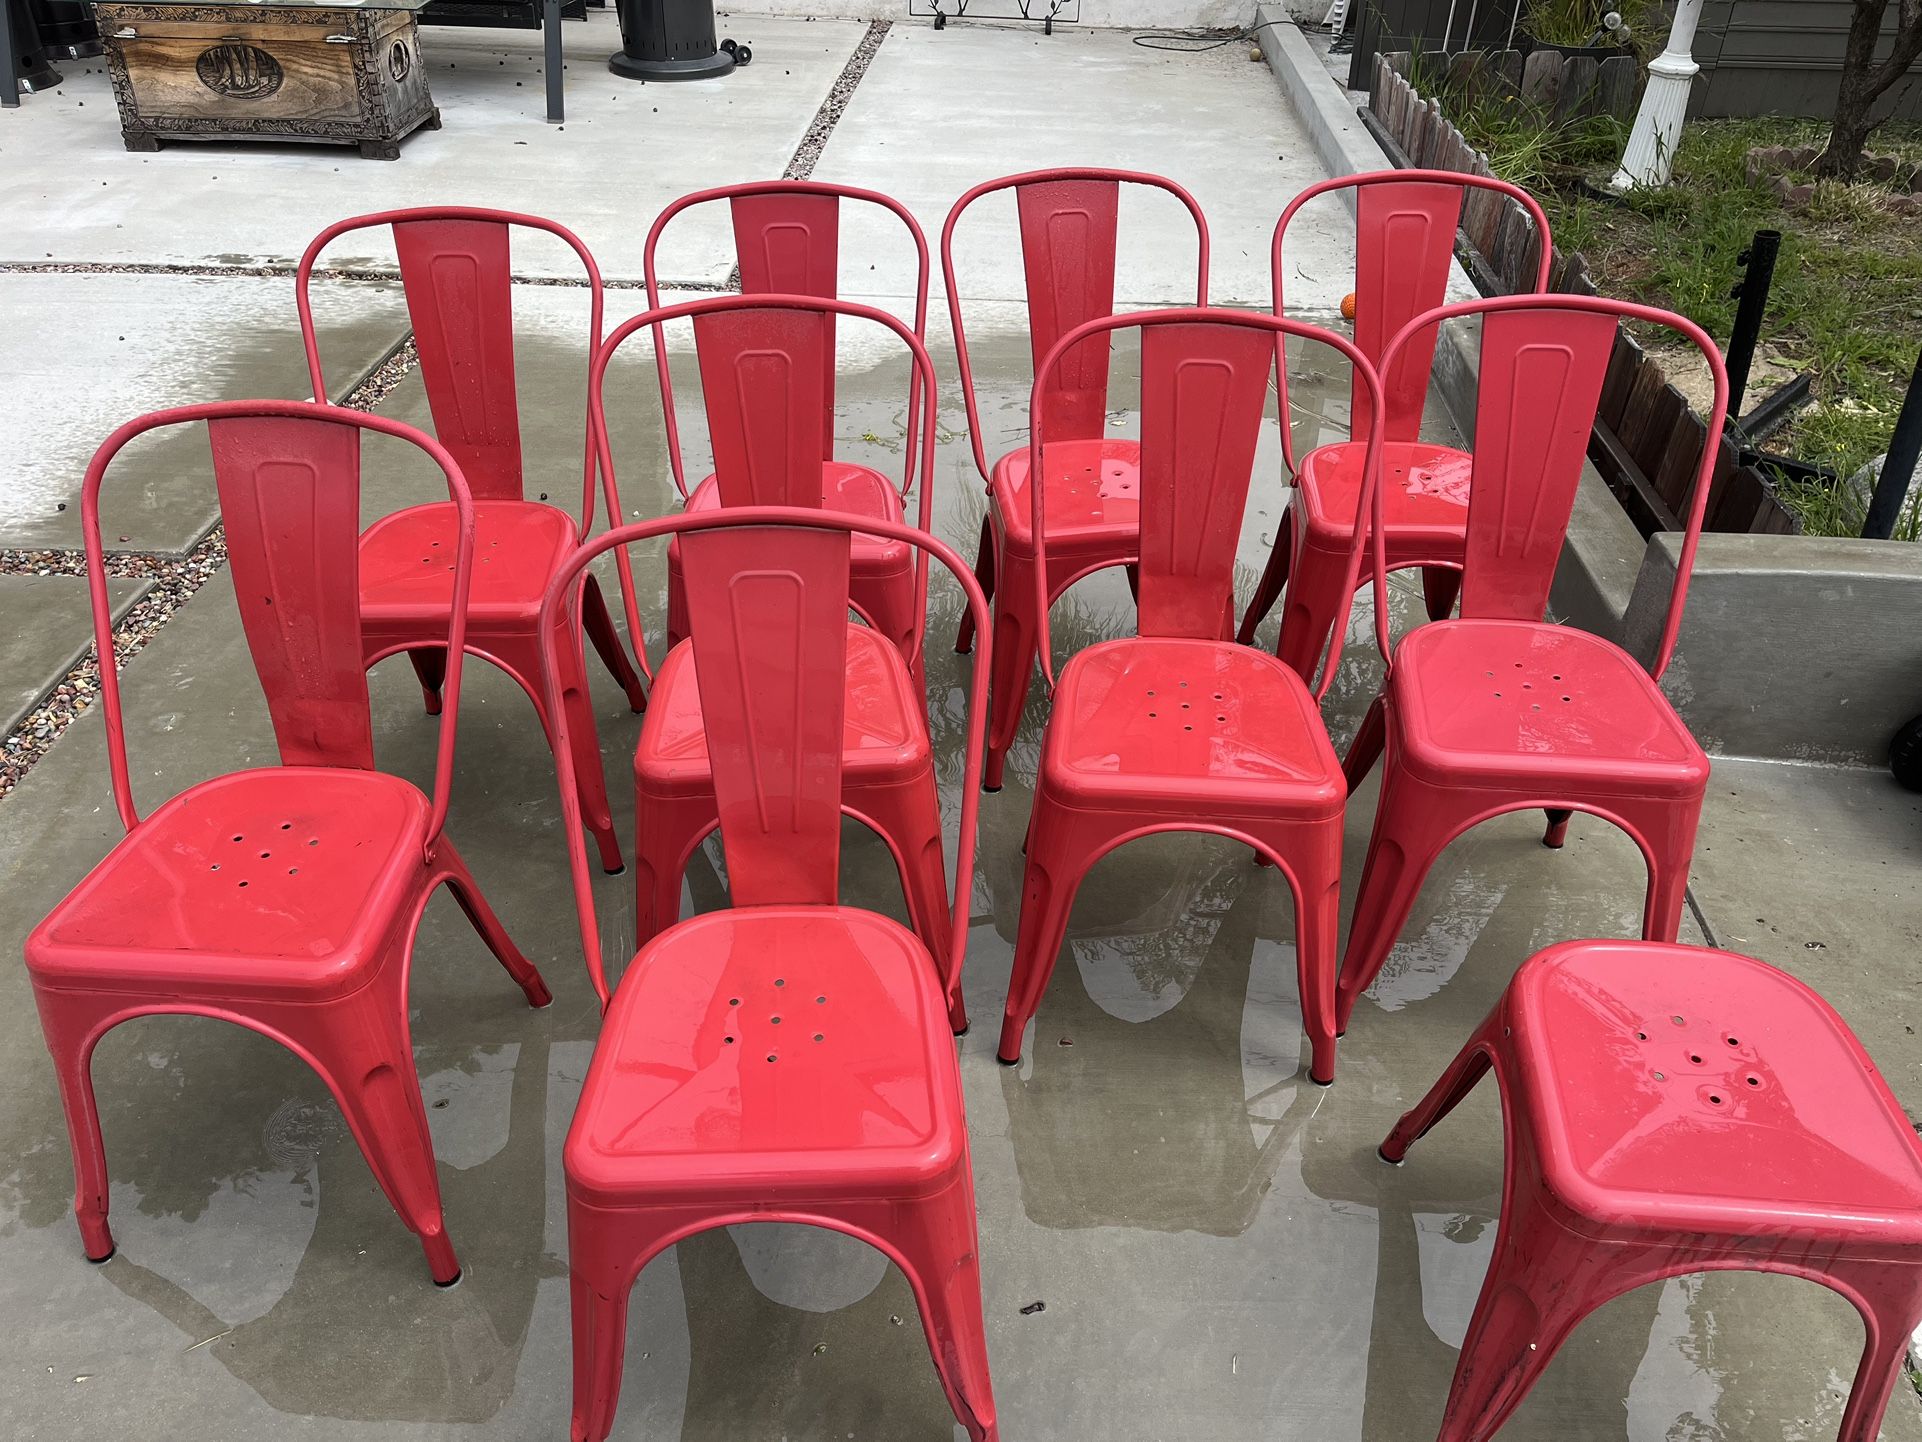 Red metal chairs